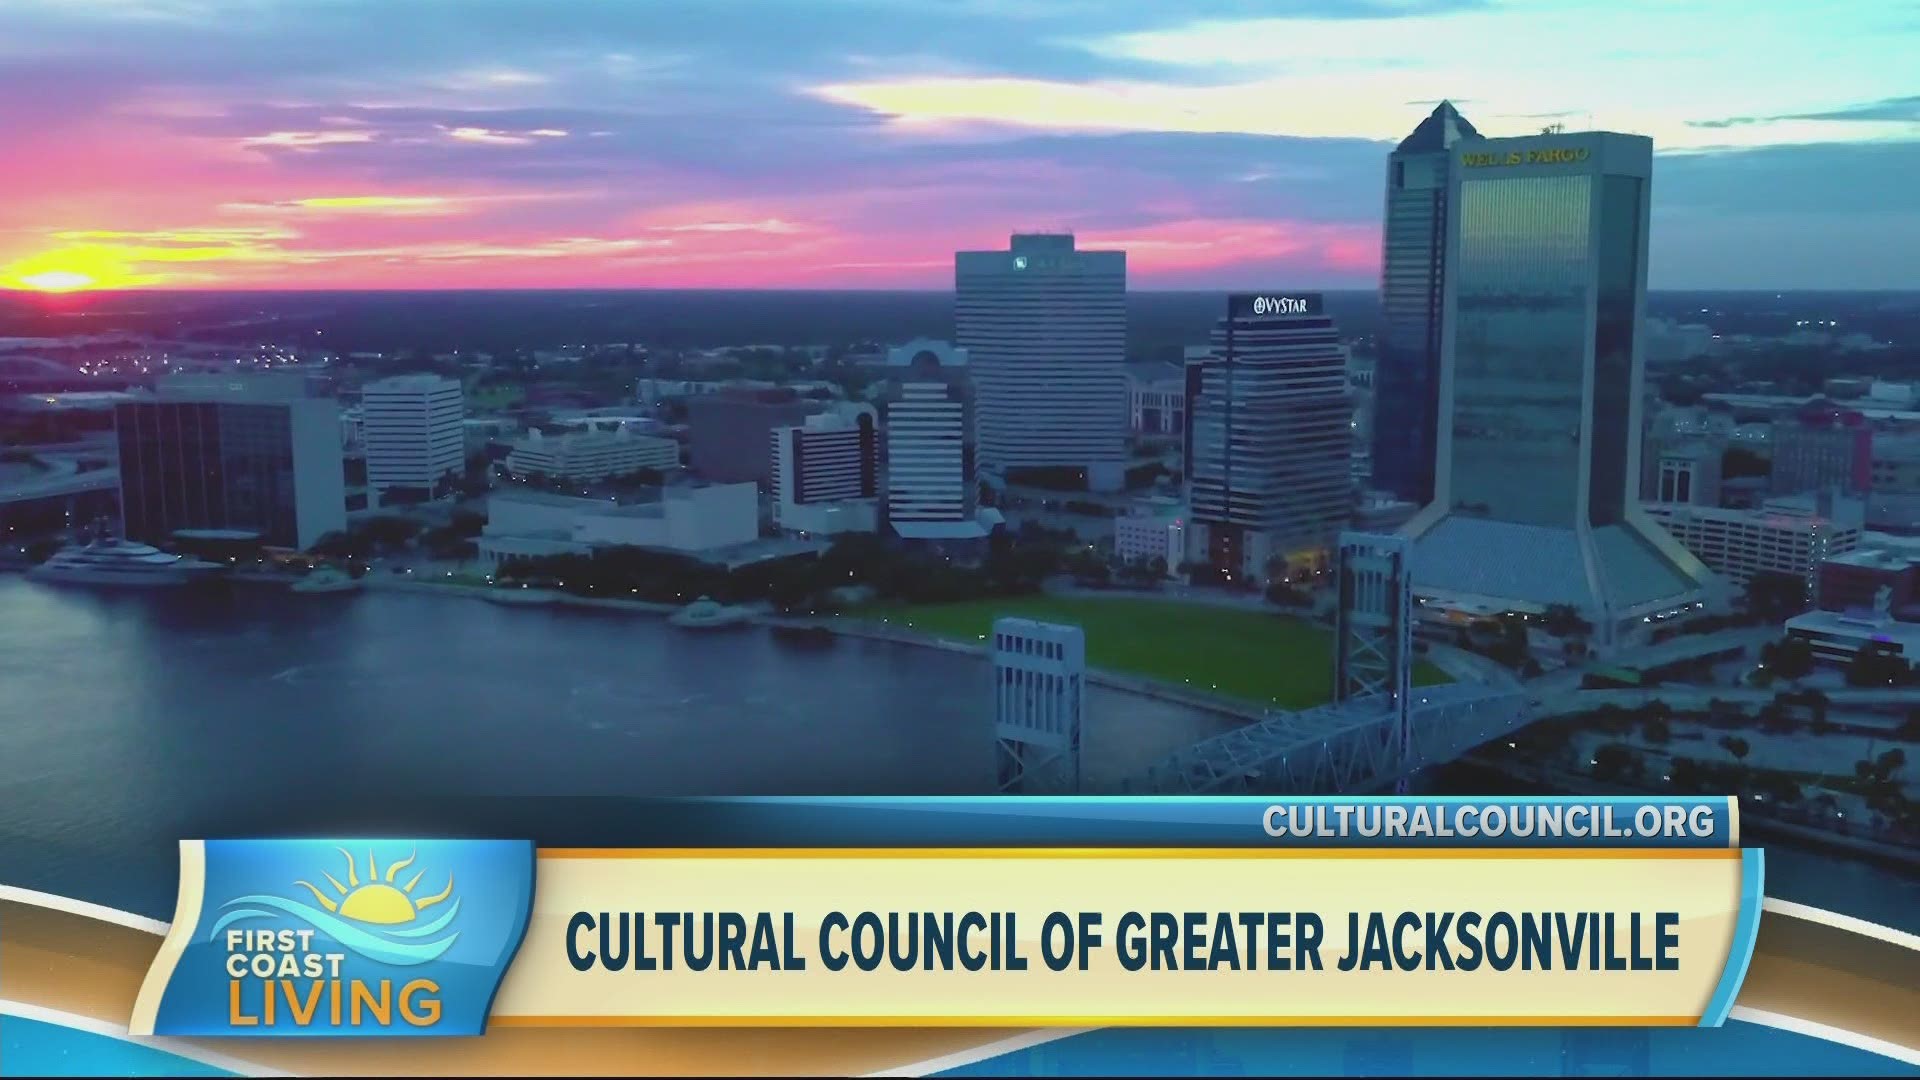 The Cultural Council continues to elevate the quality of life in Jacksonville through public art, as a regranting agency and supporting individual artists.